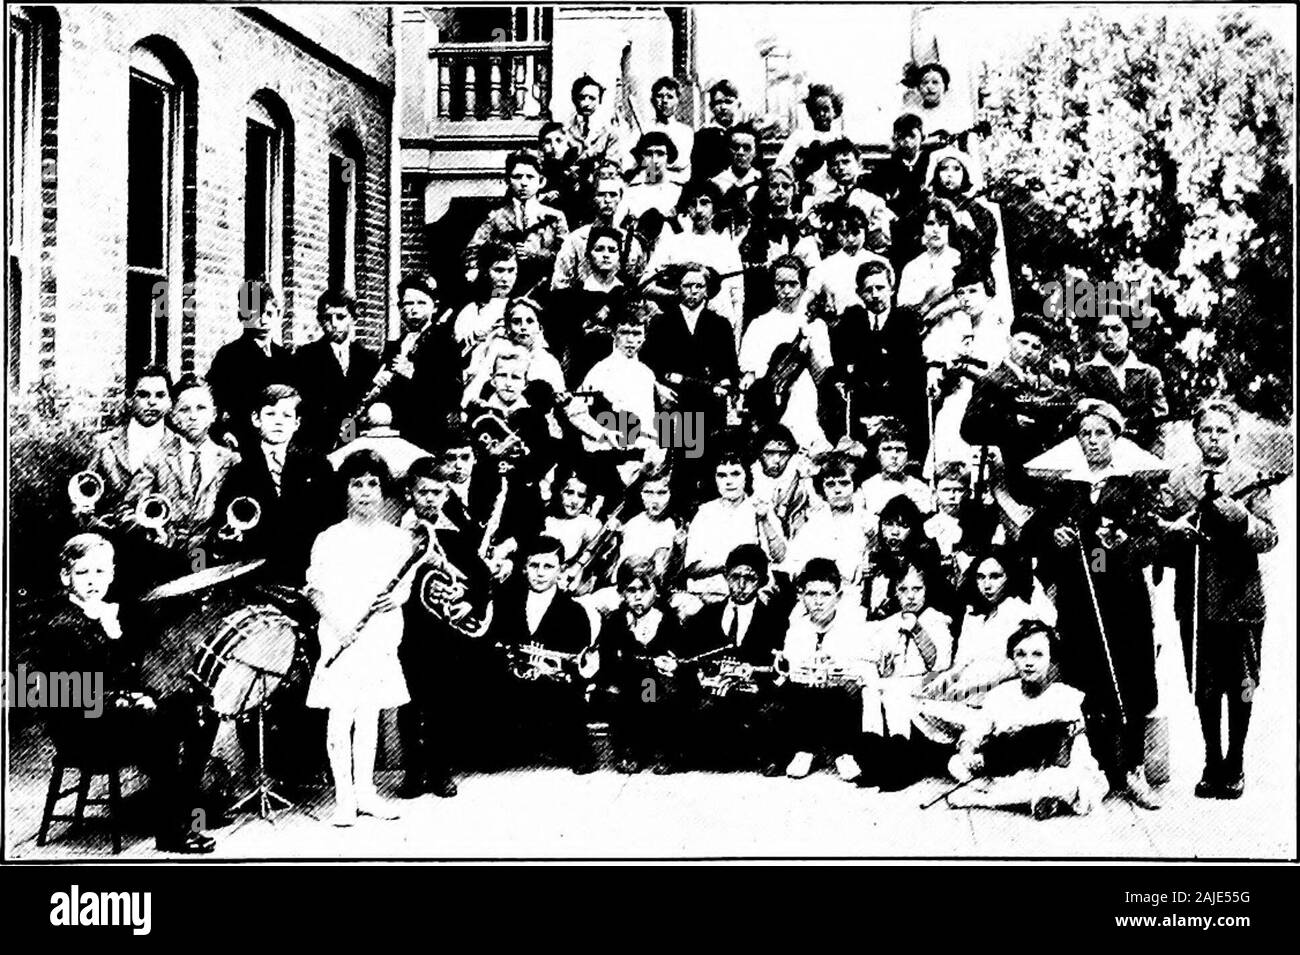 Teaching elementary school subjects . Combination 7th and 8th grade orchestra, ages 12 to 14. Los Angelespublic schools. Junior orchestra, ages 6 to 12 MUSIC 333 ests instrument players of the community in the school andenlarges the appeal made by school music to the general pub-lic. It often helps a pupil to discover a talent that may leadto professional work. 4. Instrumental Forms.—The fourth step is the study ofinstrumental forms. The interest awakened in instrumentsand their playing naturally leads on to interest in the musicproduced. To start with, this may be no more profound instyle tha Stock Photo